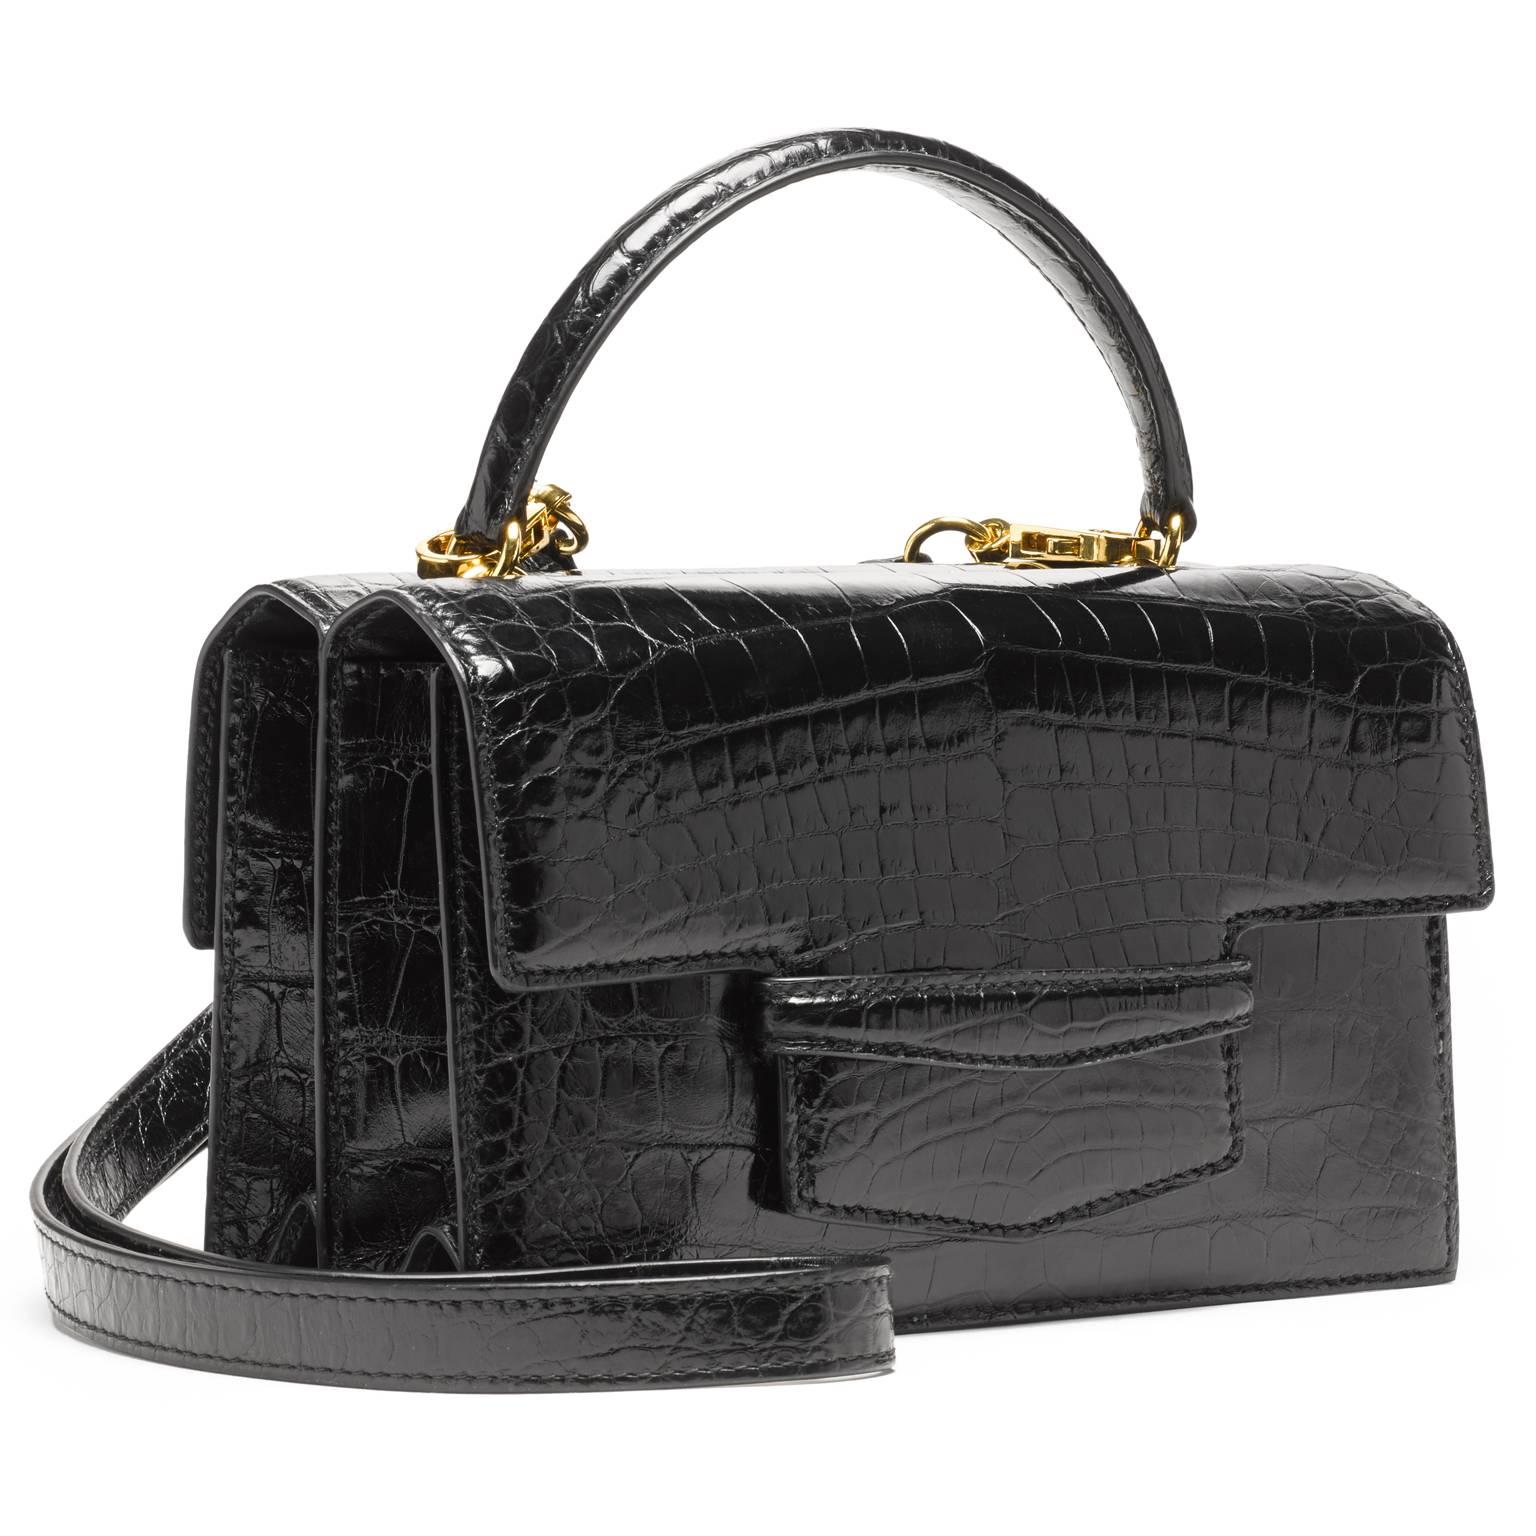 This double gusseted alligator bag is fully lined in leather. A stitched double-sided handle is joined to the bag with two interlocking gold rings. There is an additional 38” detachable shoulder strap.

- one exterior pocket in center of the bag